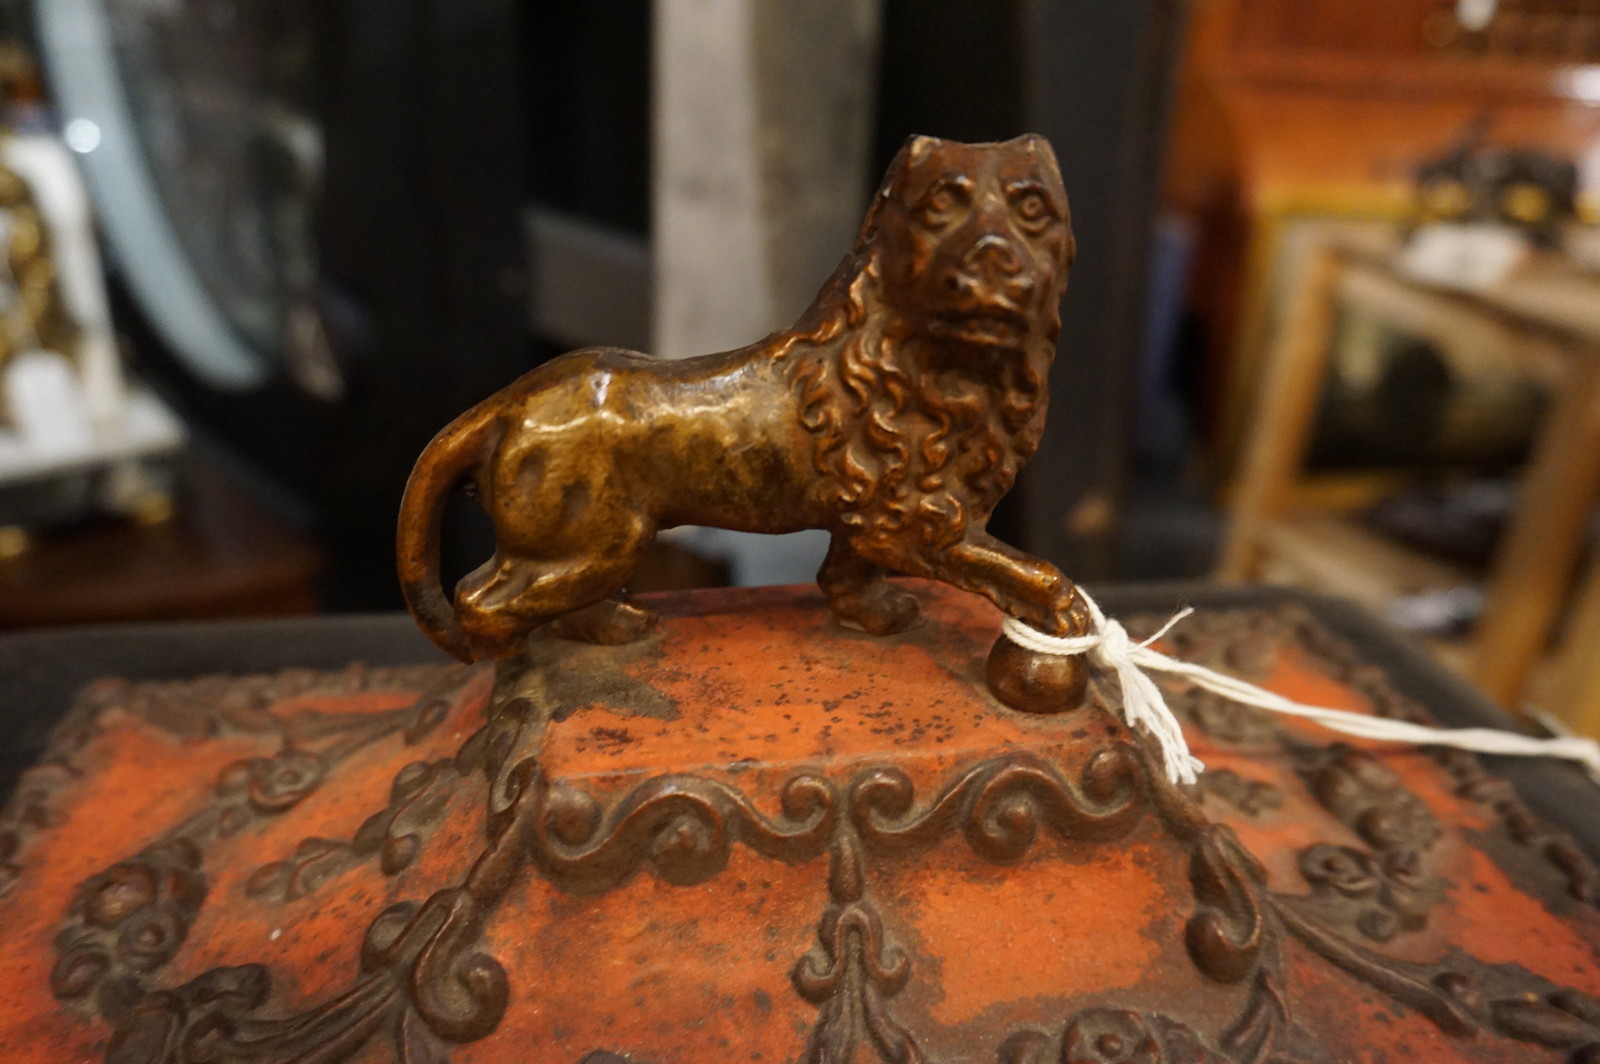 Metal bucket with lion